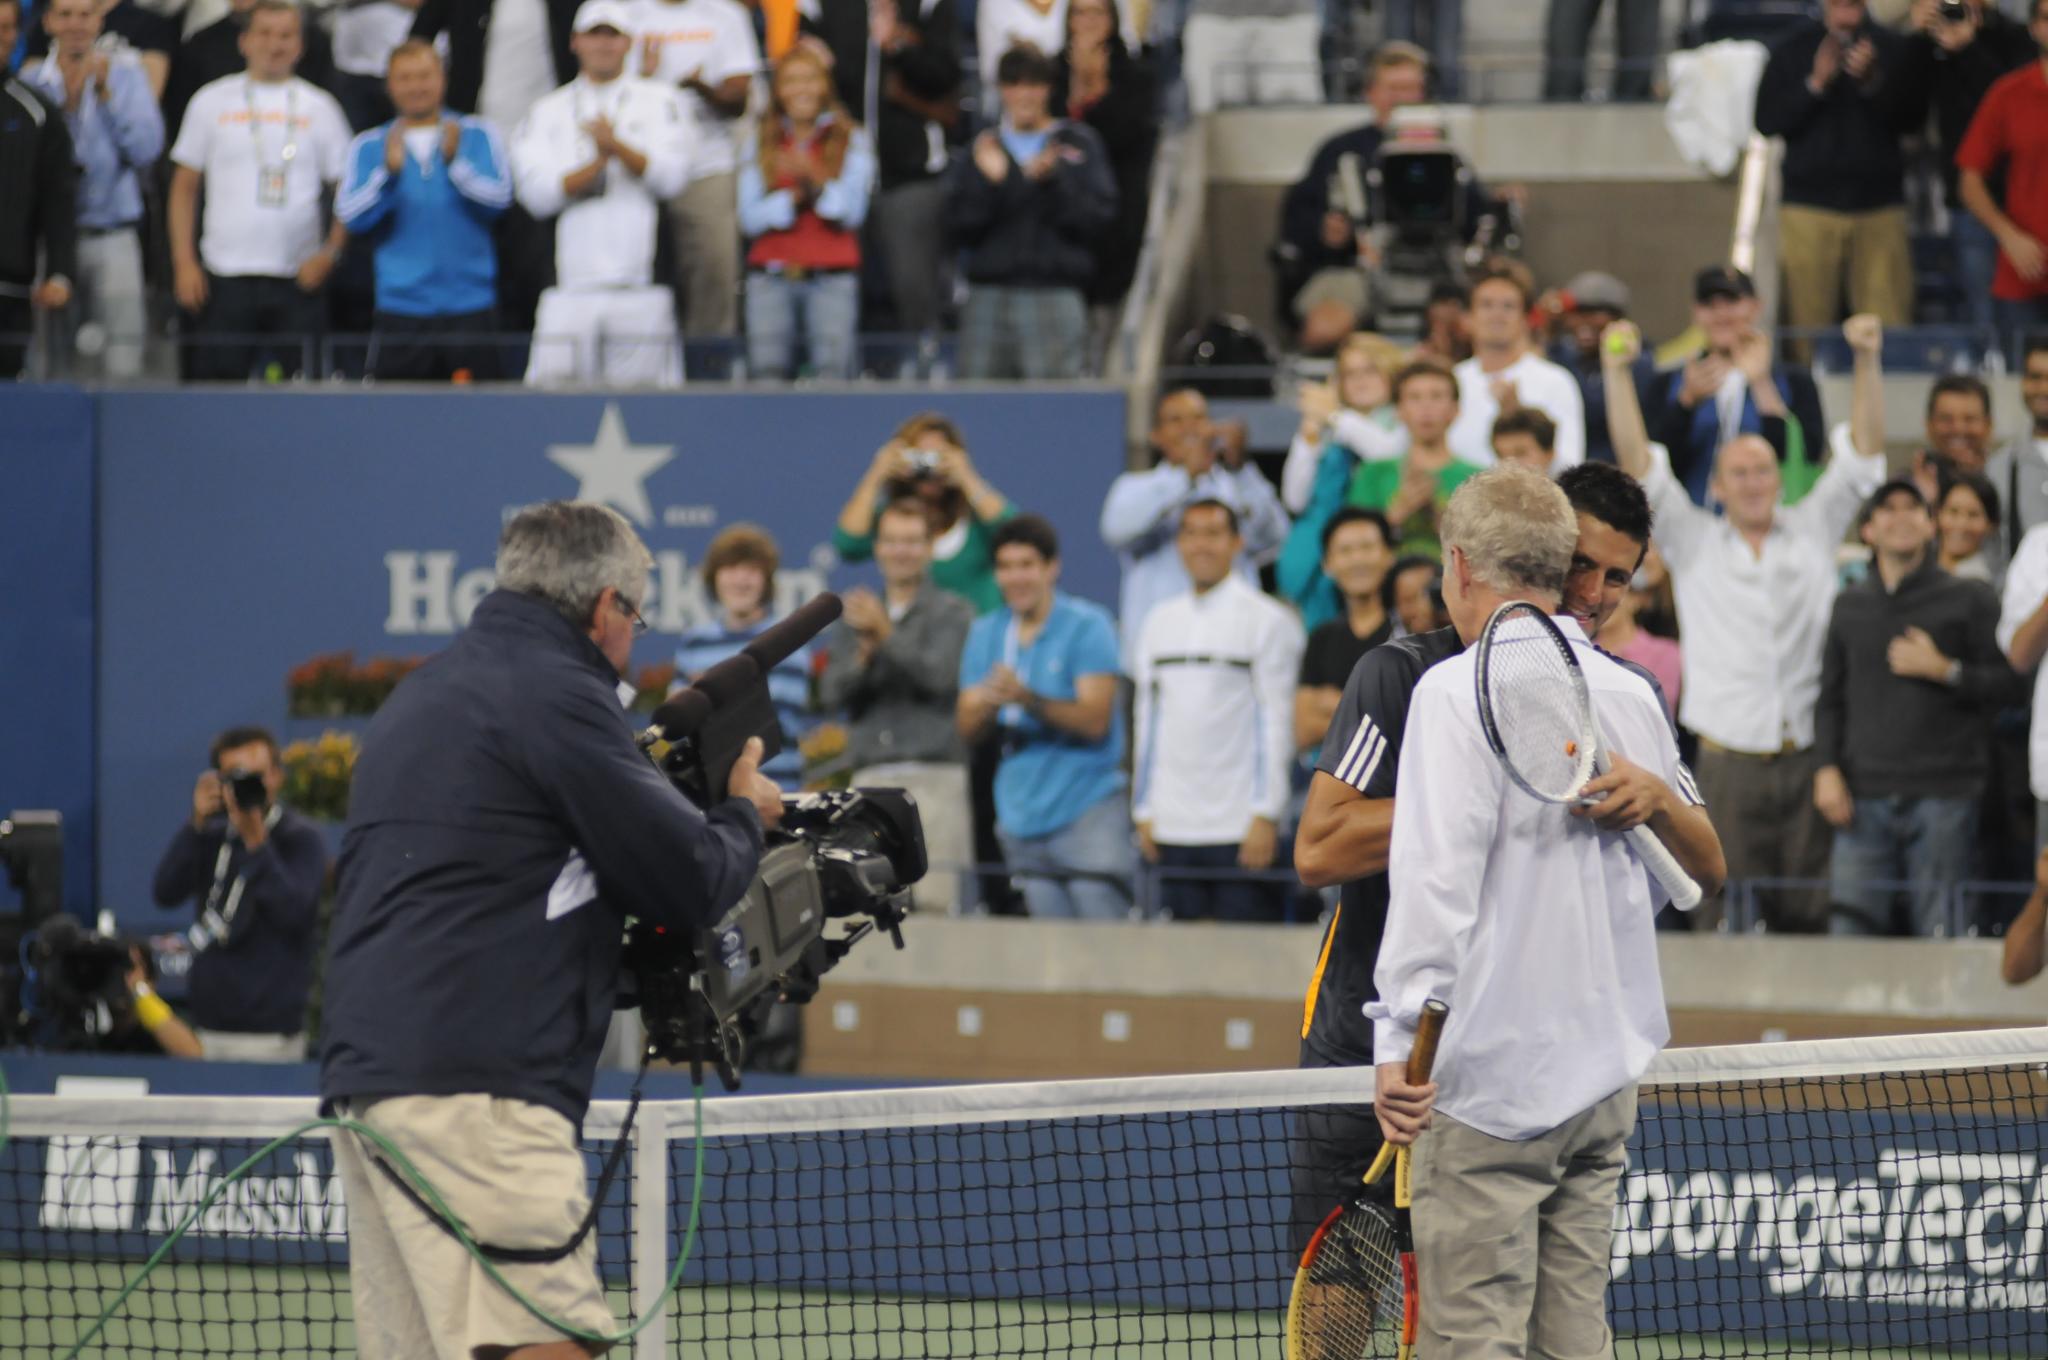 the tennis player and a cameraman talk to the media